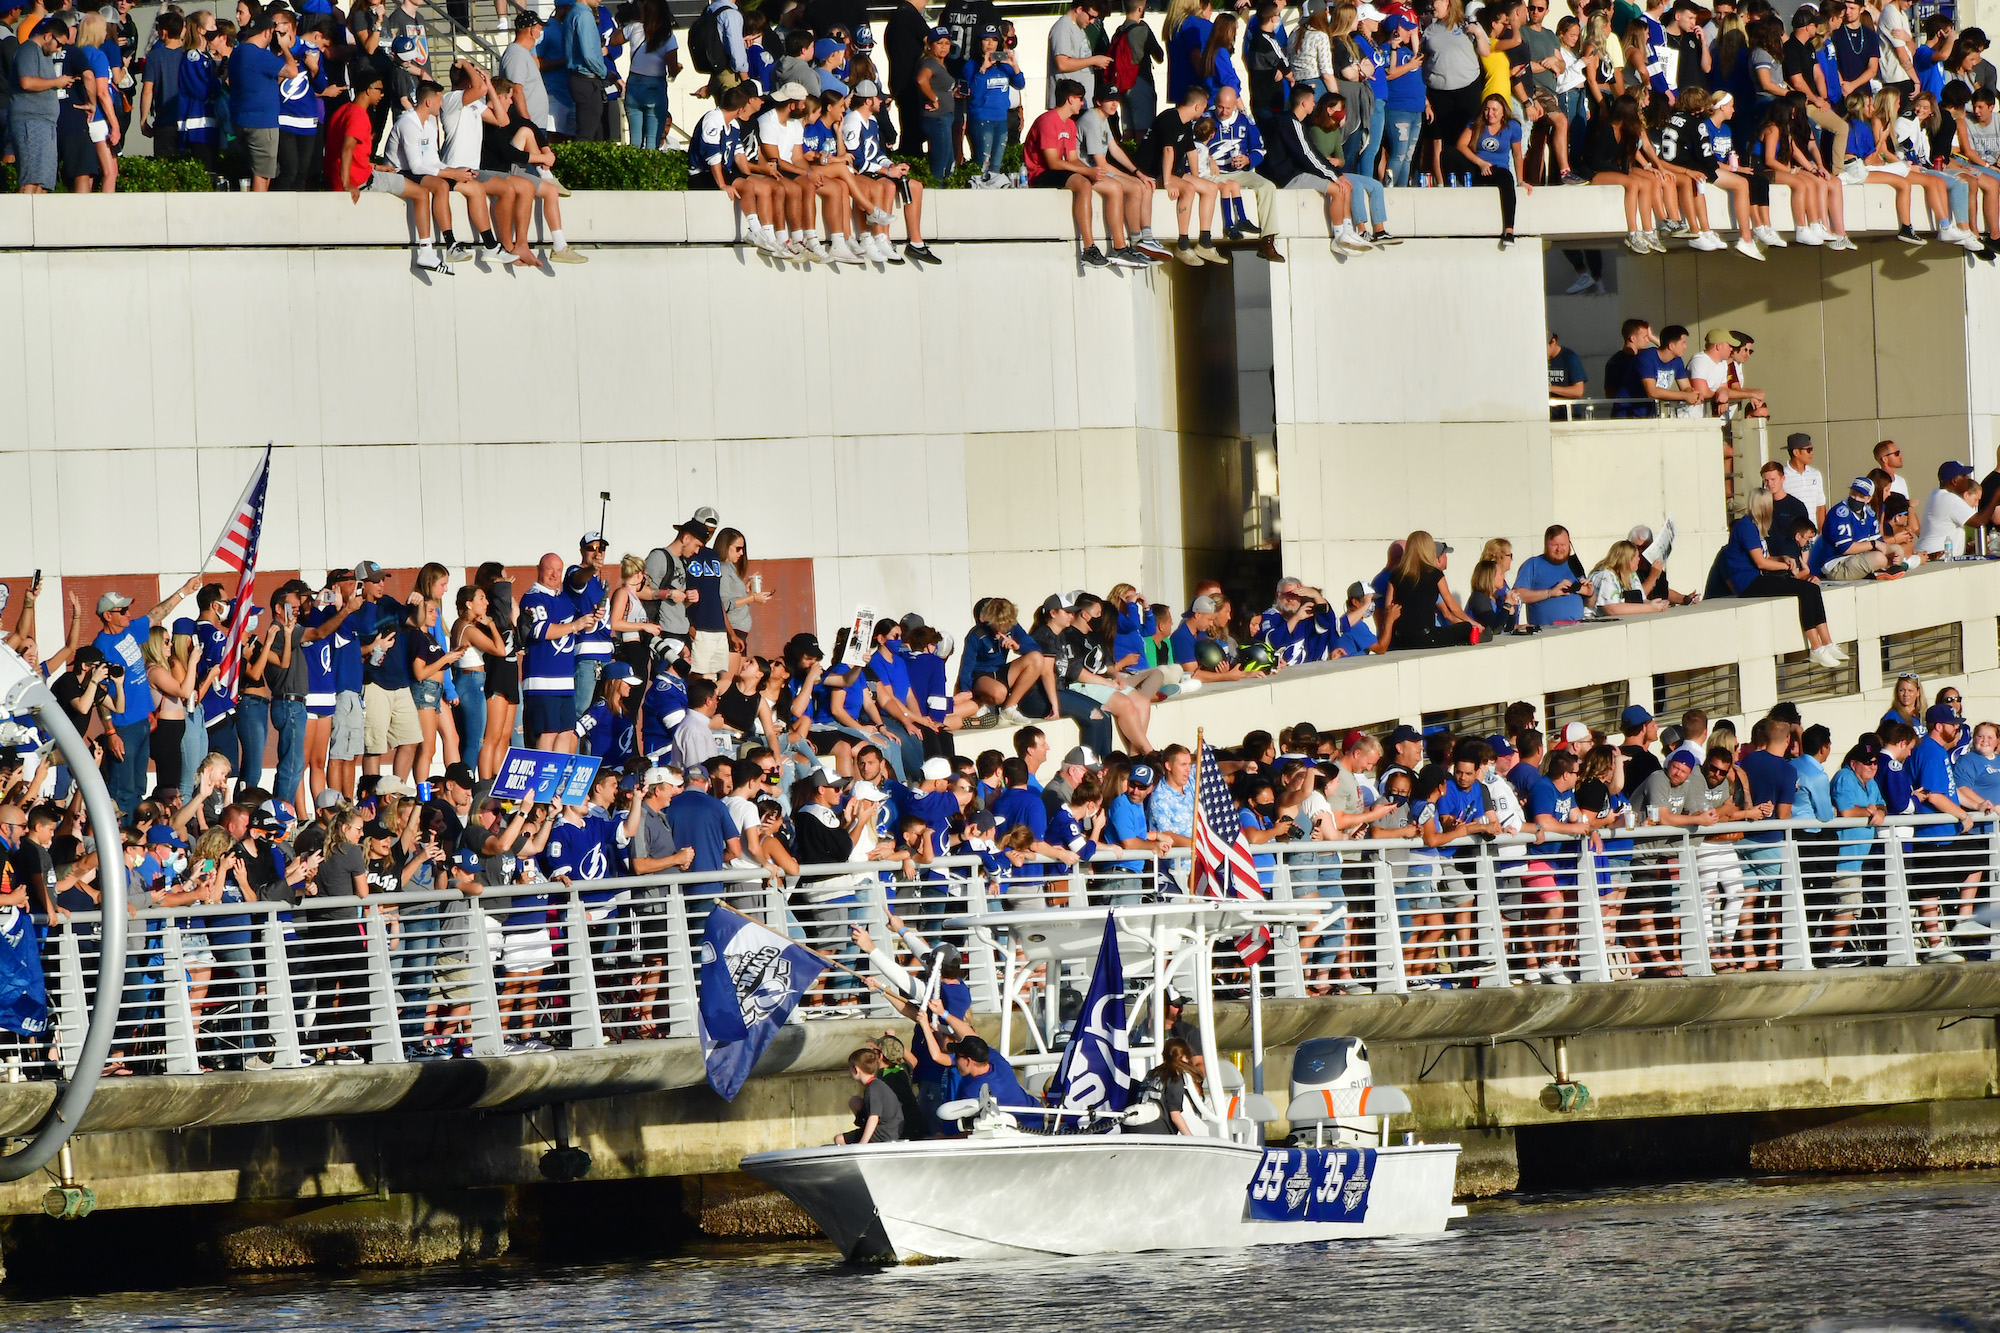 TAMPA, FLORIDA - SEPTEMBER 30: Braydon Coburn #55 and Curtis McElhinney #35 of the Tampa Bay Lightning wave to fans at the Tampa Bay Lightning Victory Rally &amp; Boat Parade on the Hillsborough river on September 30, 2020 in Tampa, Florida. (Photo by Julio Aguilar/Getty Images)